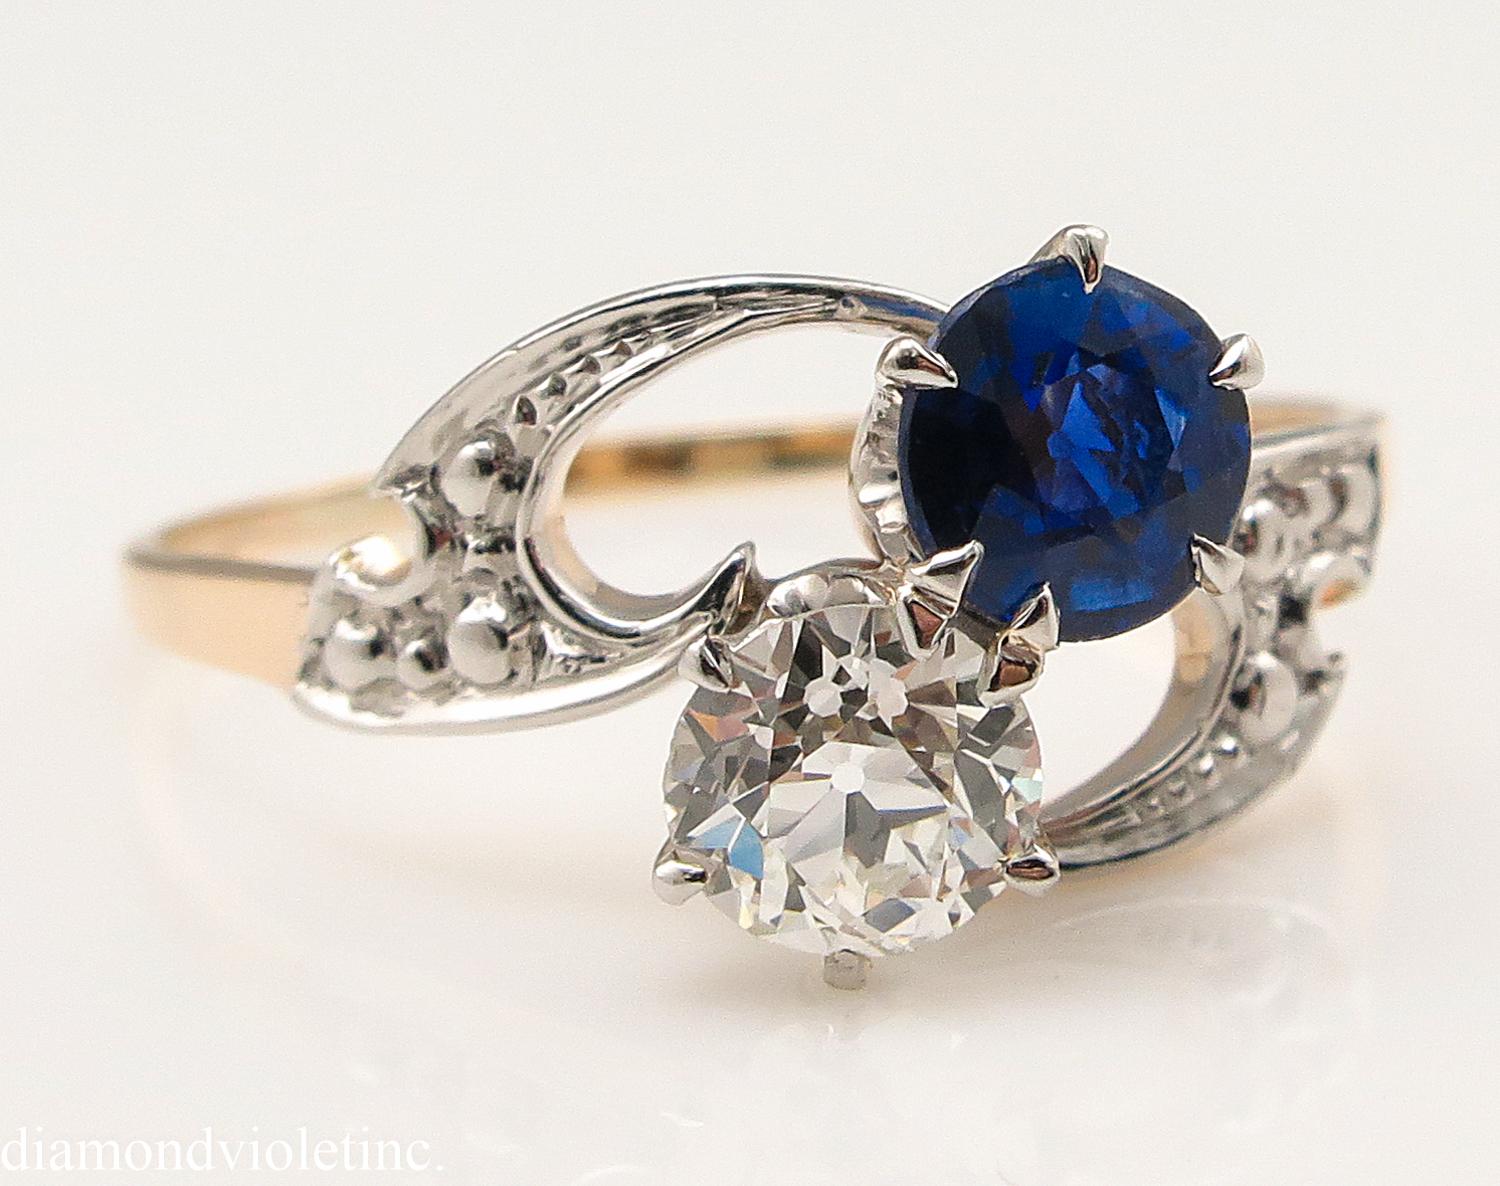 An Amazing Antique Late Victorian BEAUTIFUL CROSSOVER Diamond and Sapphire Engagement, Anniversary, Wedding or Right Hand Ring! The ring contains 0.40ct Gemologic Certified Old cut Round shaped diamond in G color and VS clarity (Near COLORLESS and